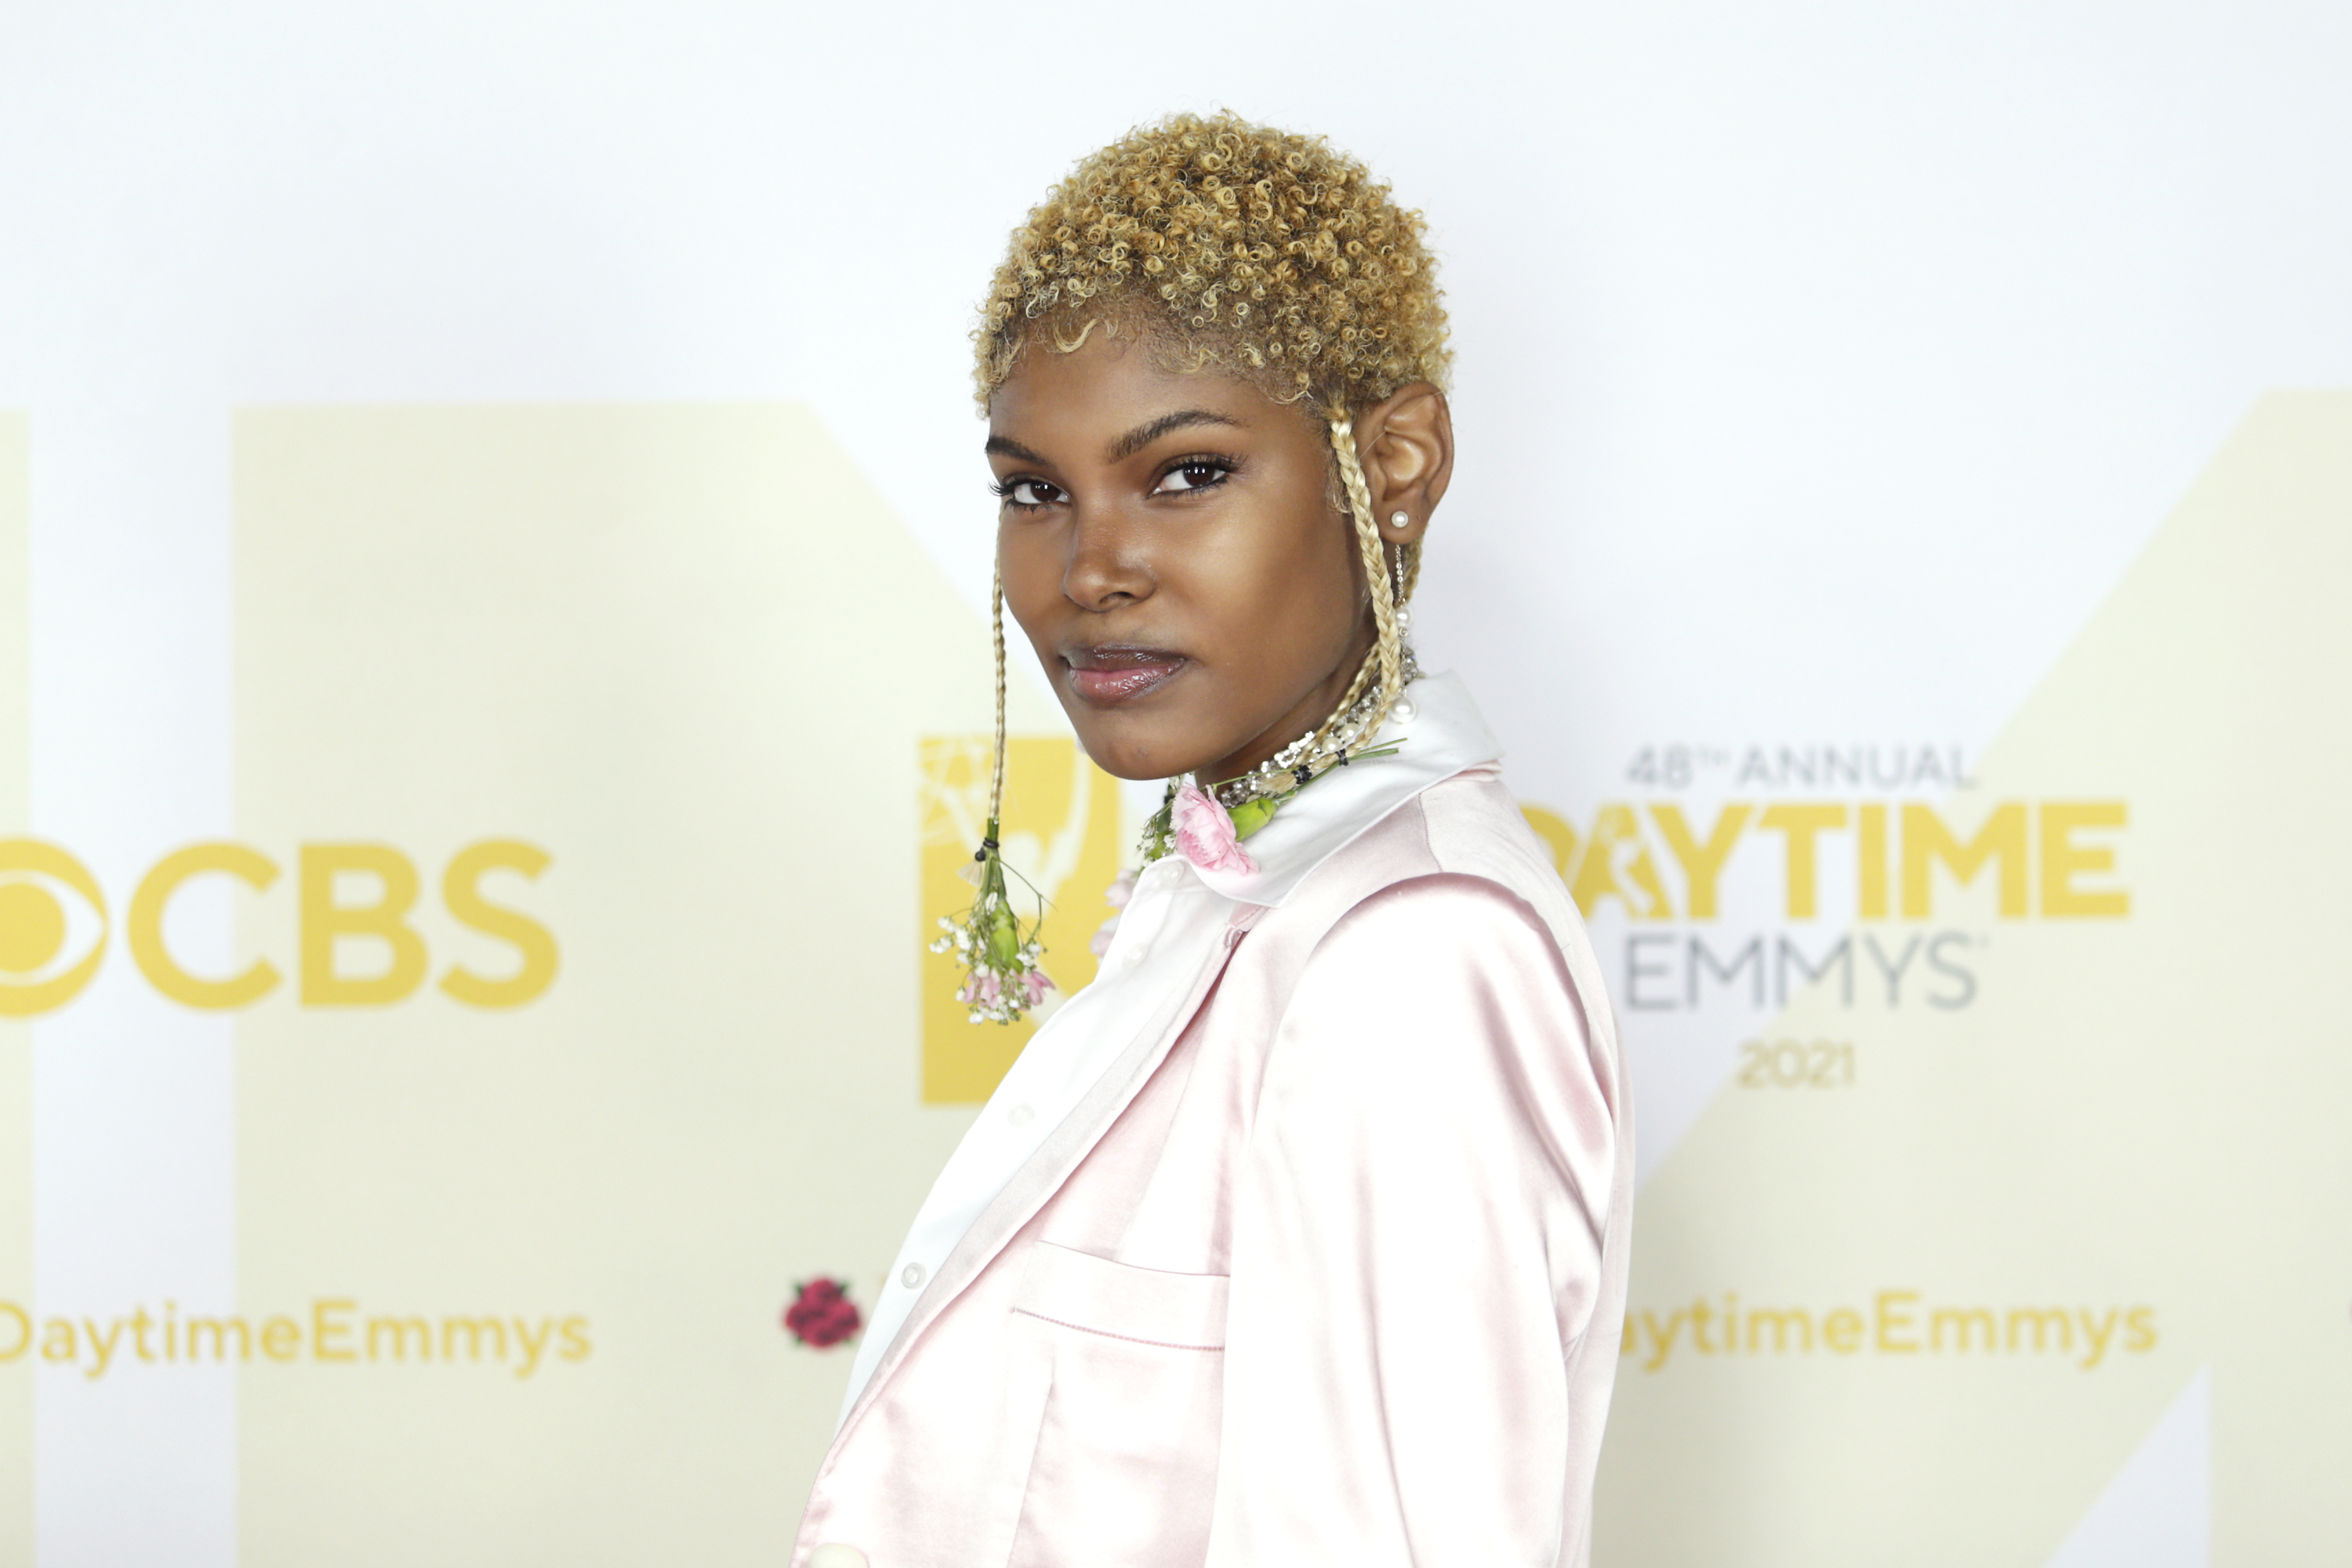 'The Bold and the Beautiful' actor Diamond White wearing a pink blazer and posing on the red carpet.